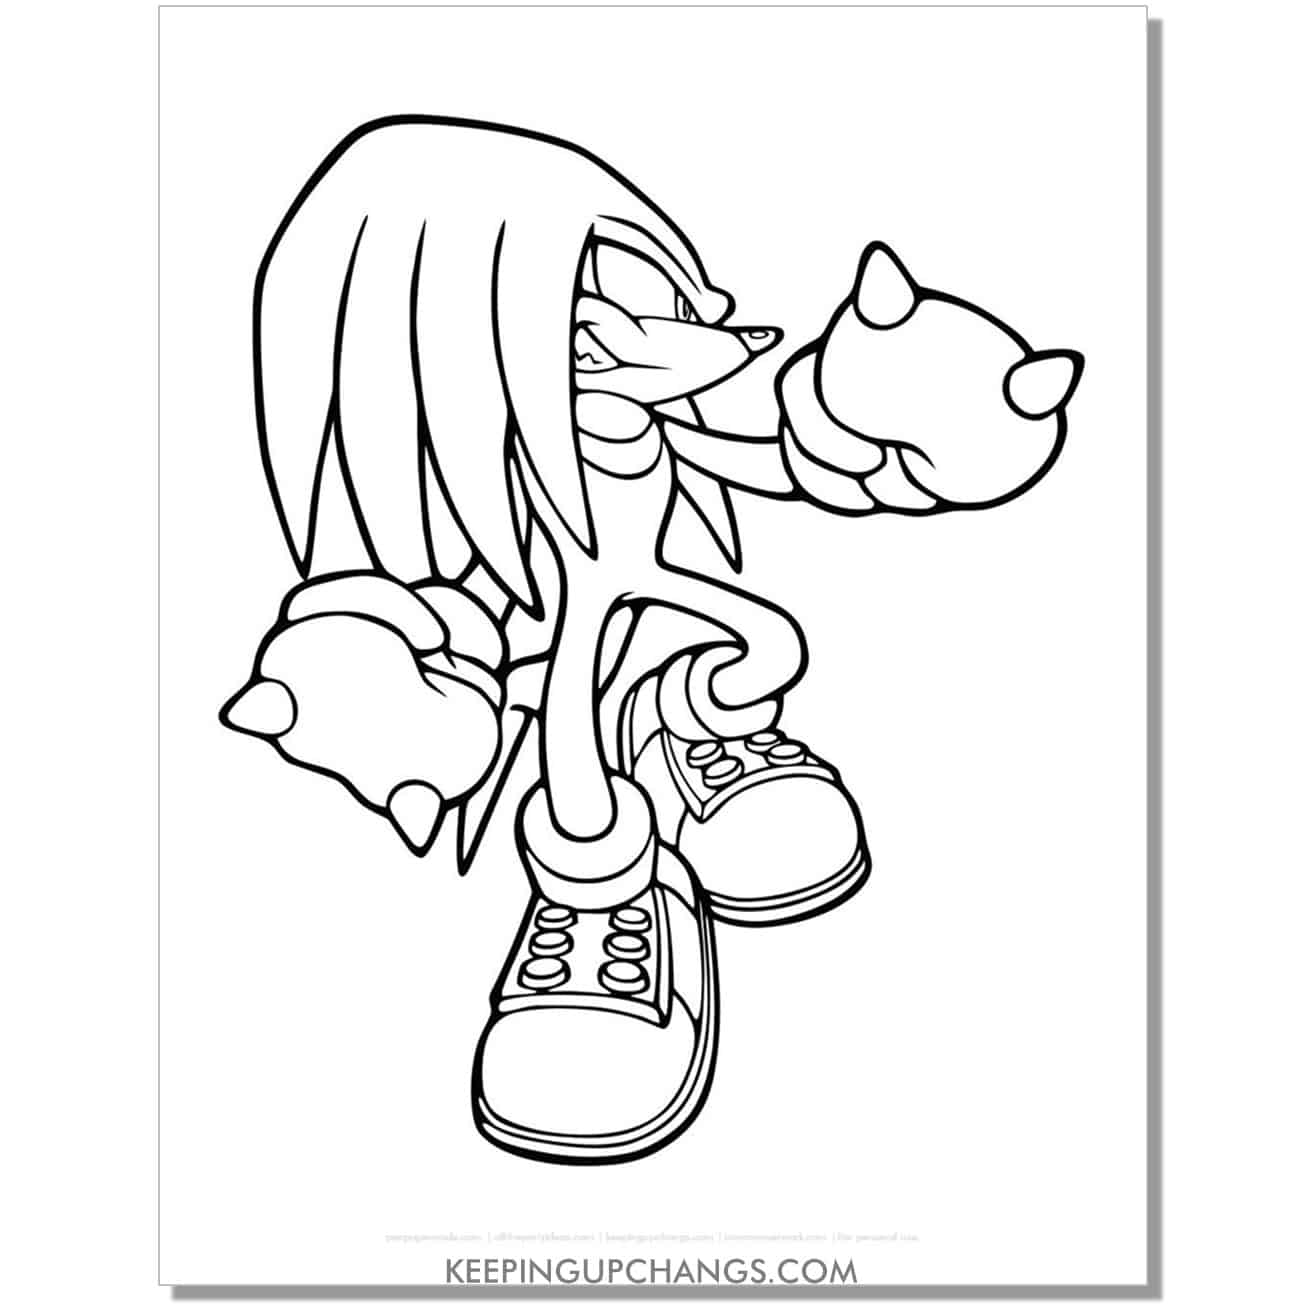 knuckles looking to side sonic coloring page.